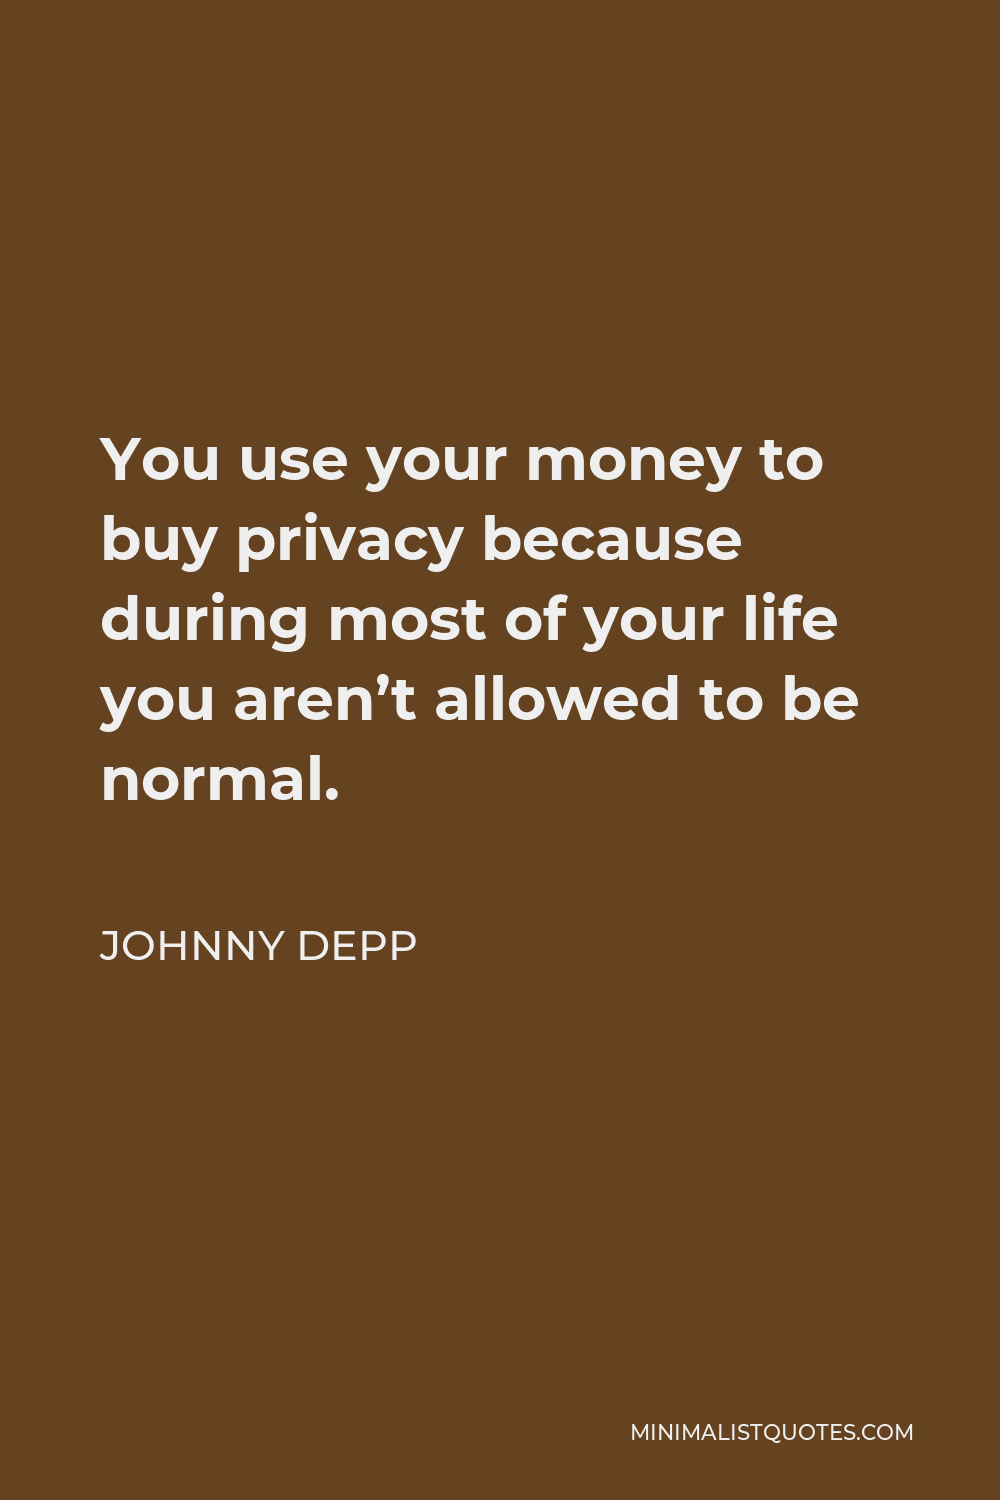 Johnny Depp Quote - You use your money to buy privacy because during most of your life you aren’t allowed to be normal.